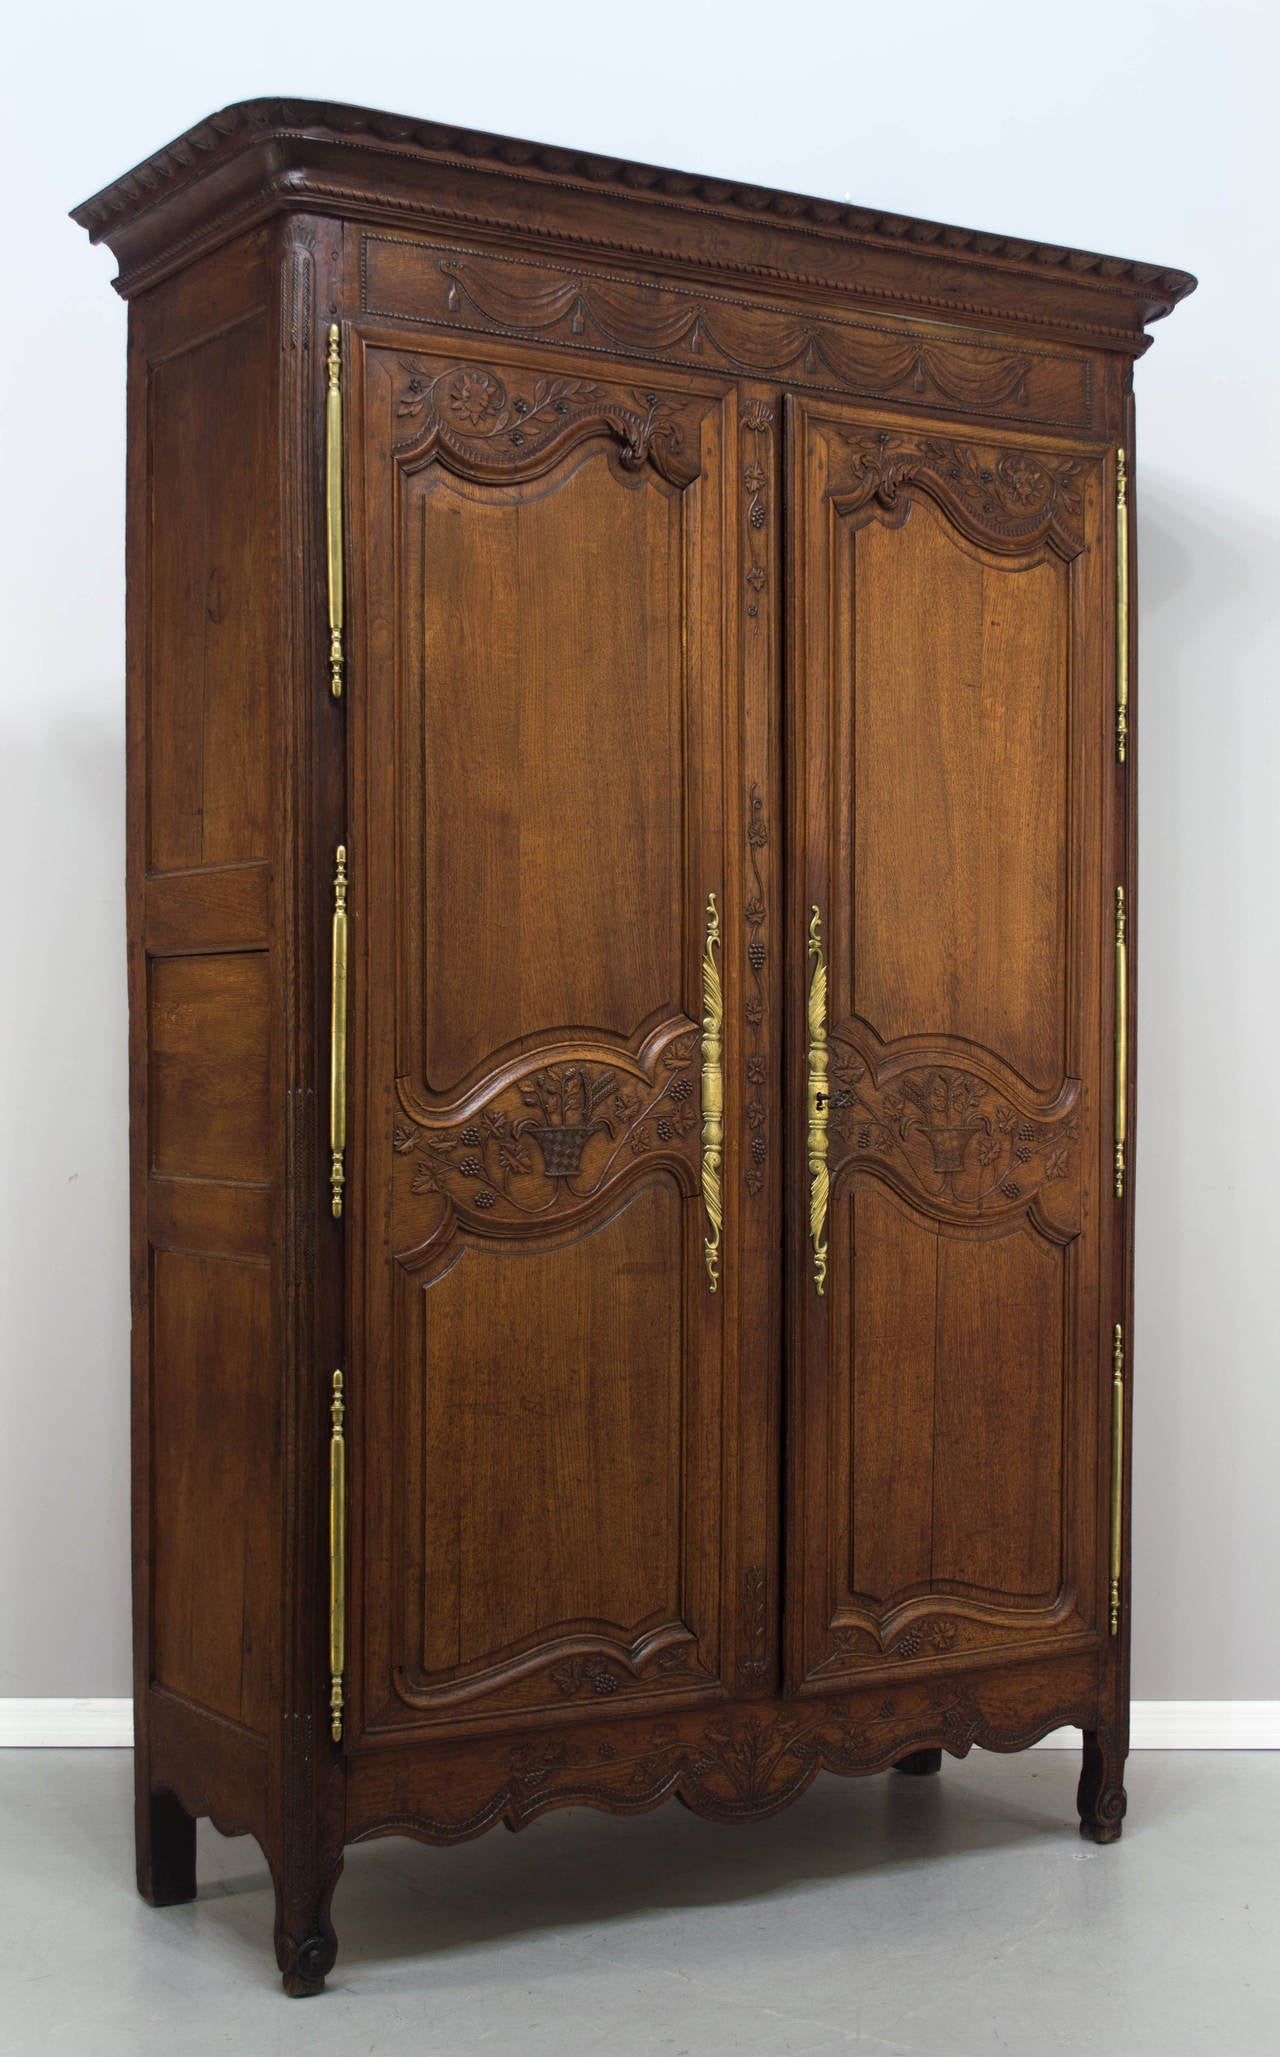 18th c. French Country armoire from Normandy, large in scale and made of oak with nice hand carvings including baskets and trailing grape vines on door panels, drapes and tassels at the top, and herringbone pattern on the corners between the hinges.